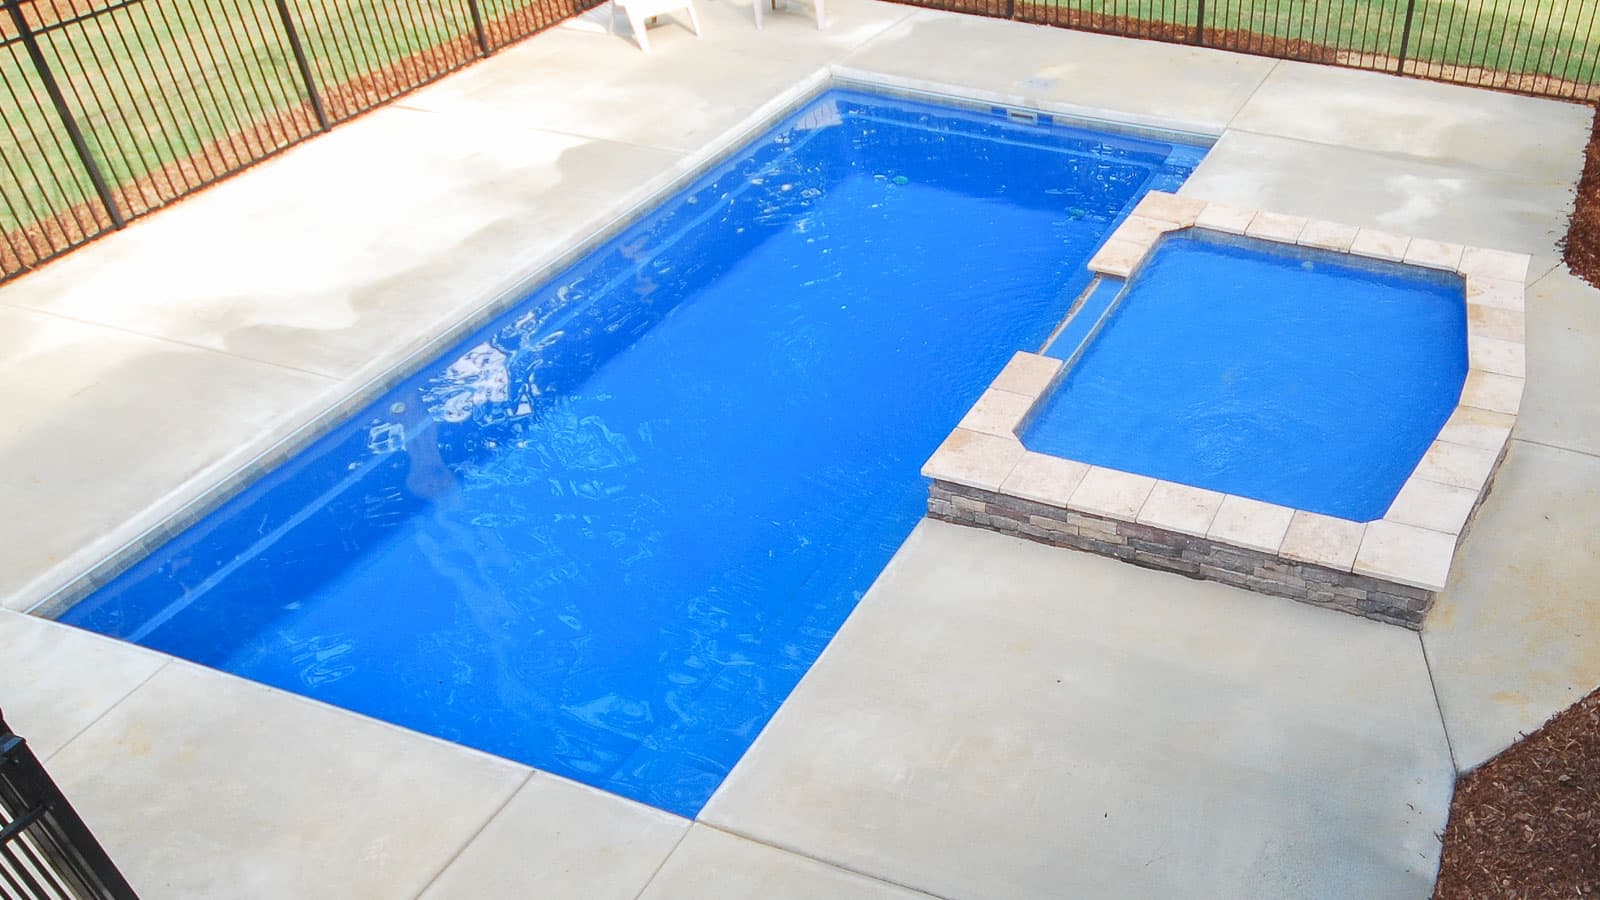 Imagine Pools FiberGlass Pool - The Pearl Tanning Ledge Pool By PoolForce - About Inground Pools